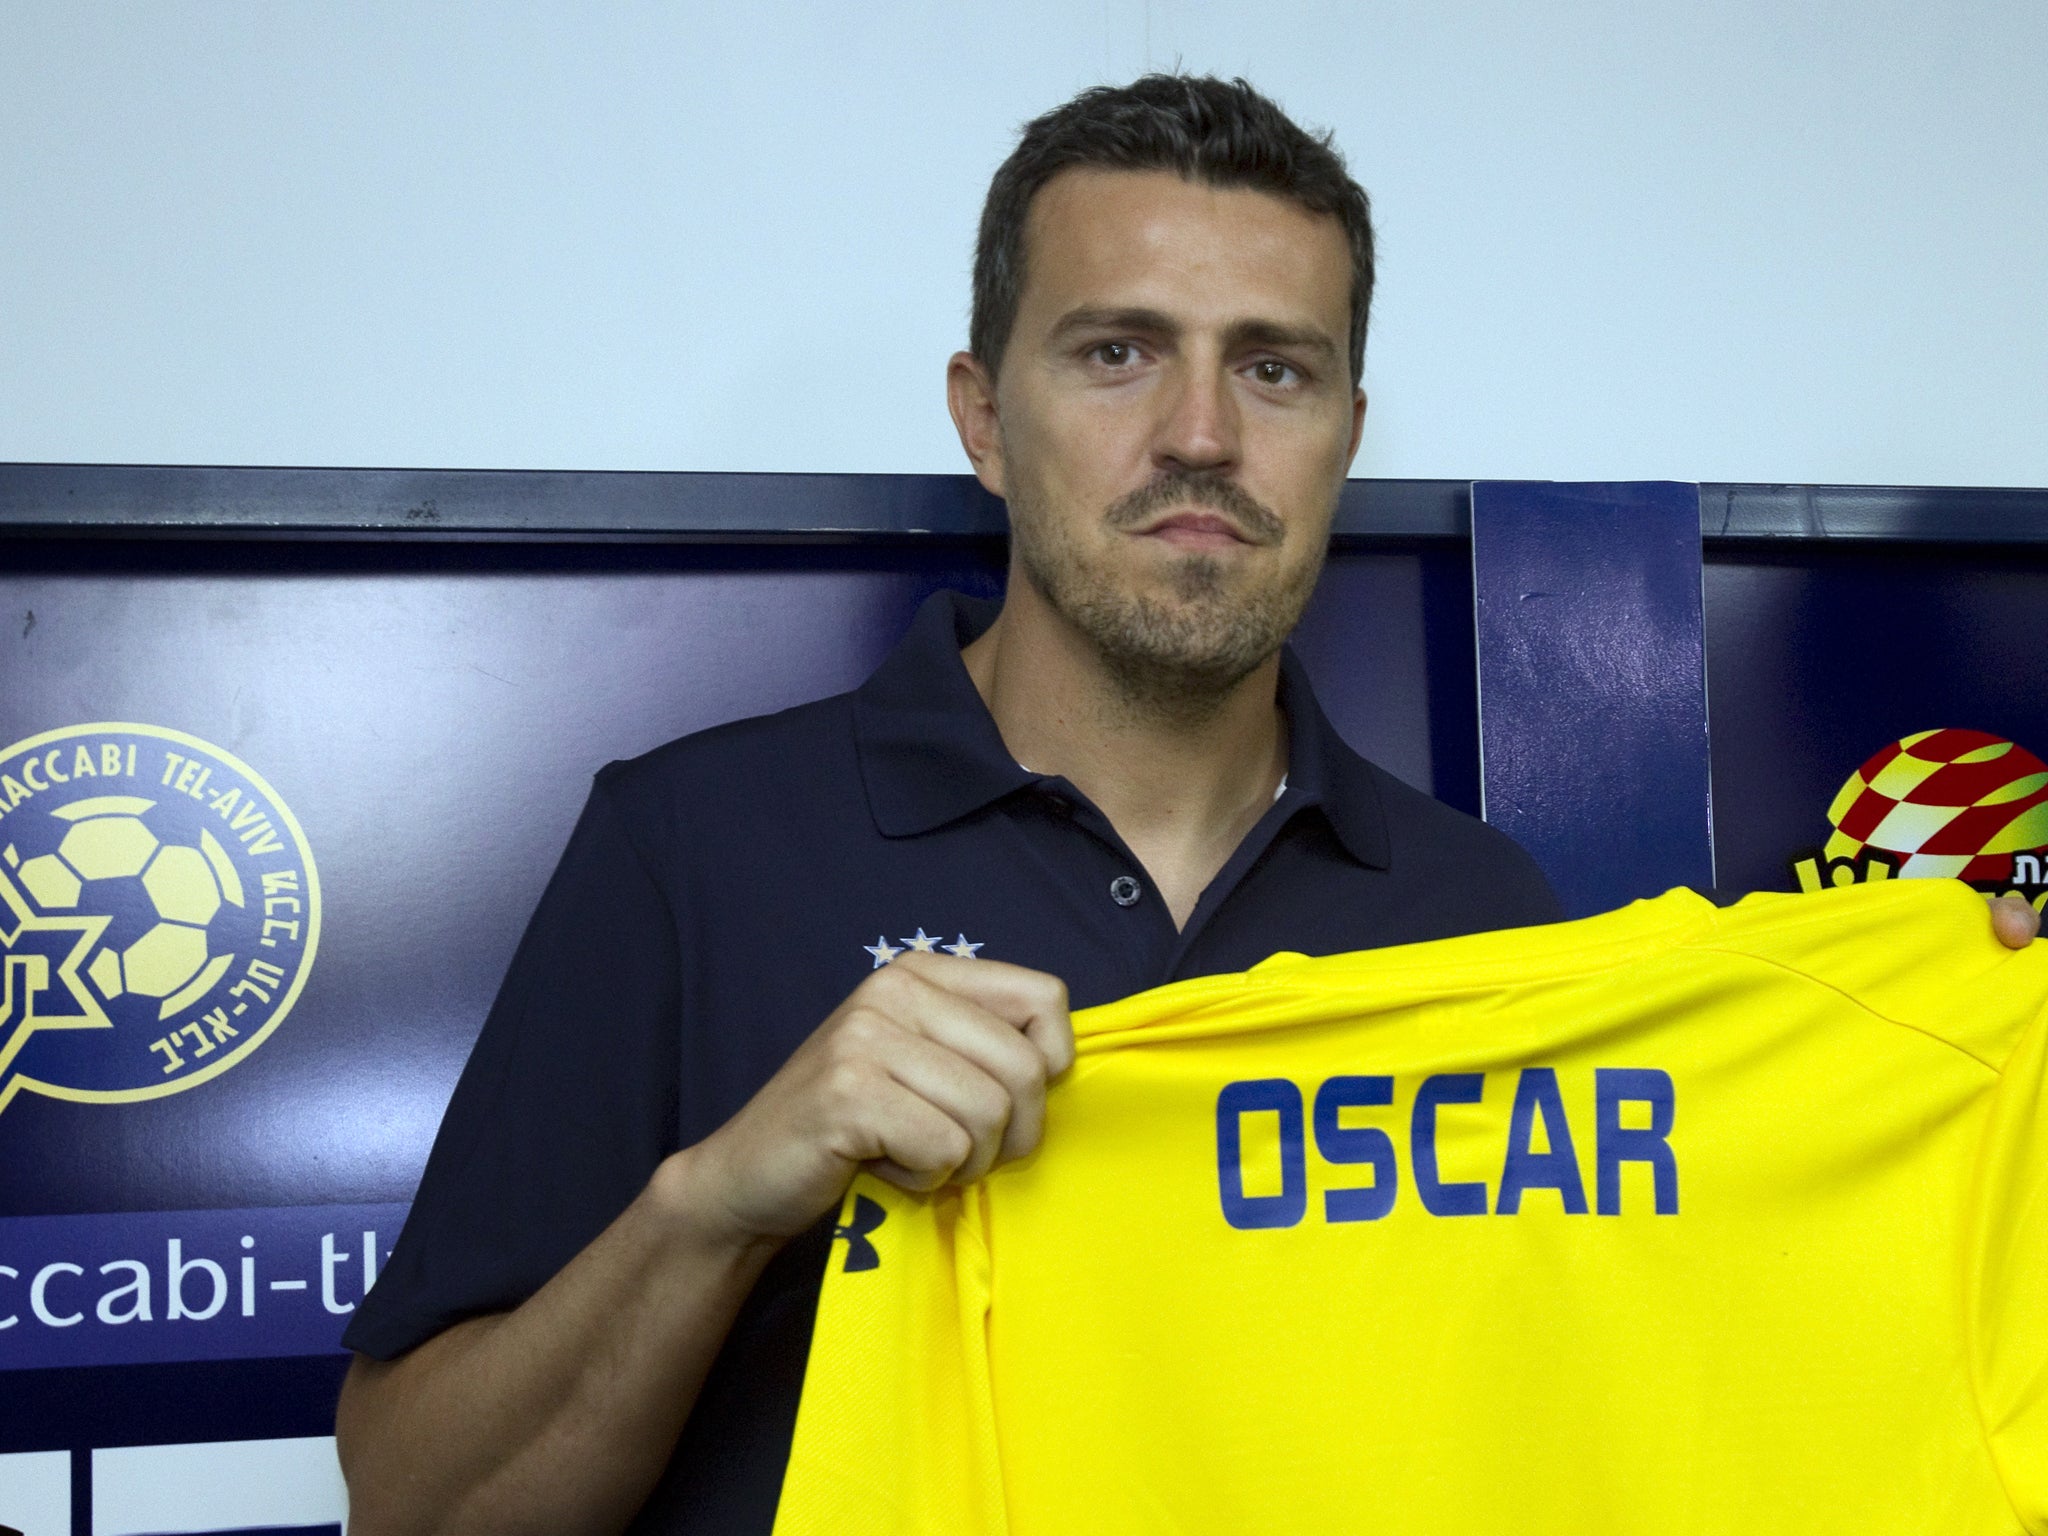 Former Spanish footballer Oscar Garcia looks set to be named as new Brighton and Hove Albion manager